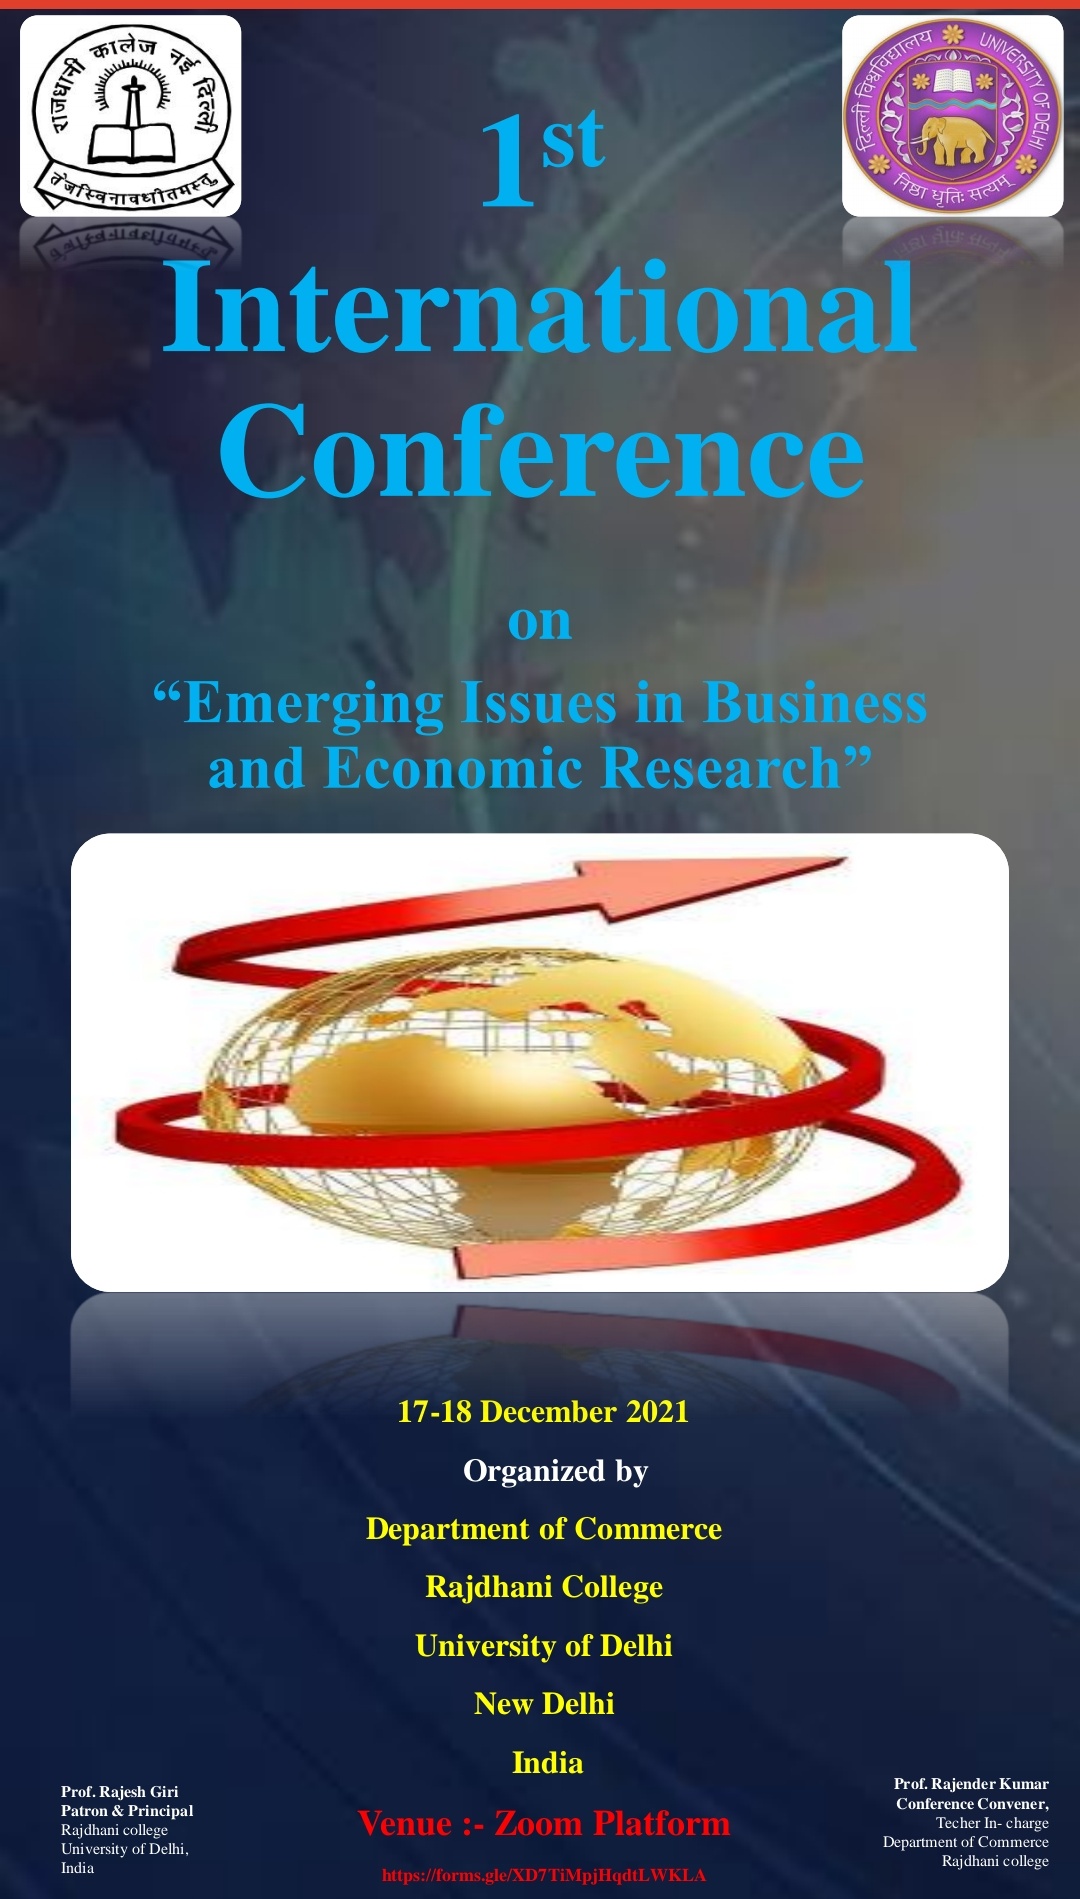 1st. International Conference in “Emerging Issues in Business and Economic Research” (17-18 December 2021)